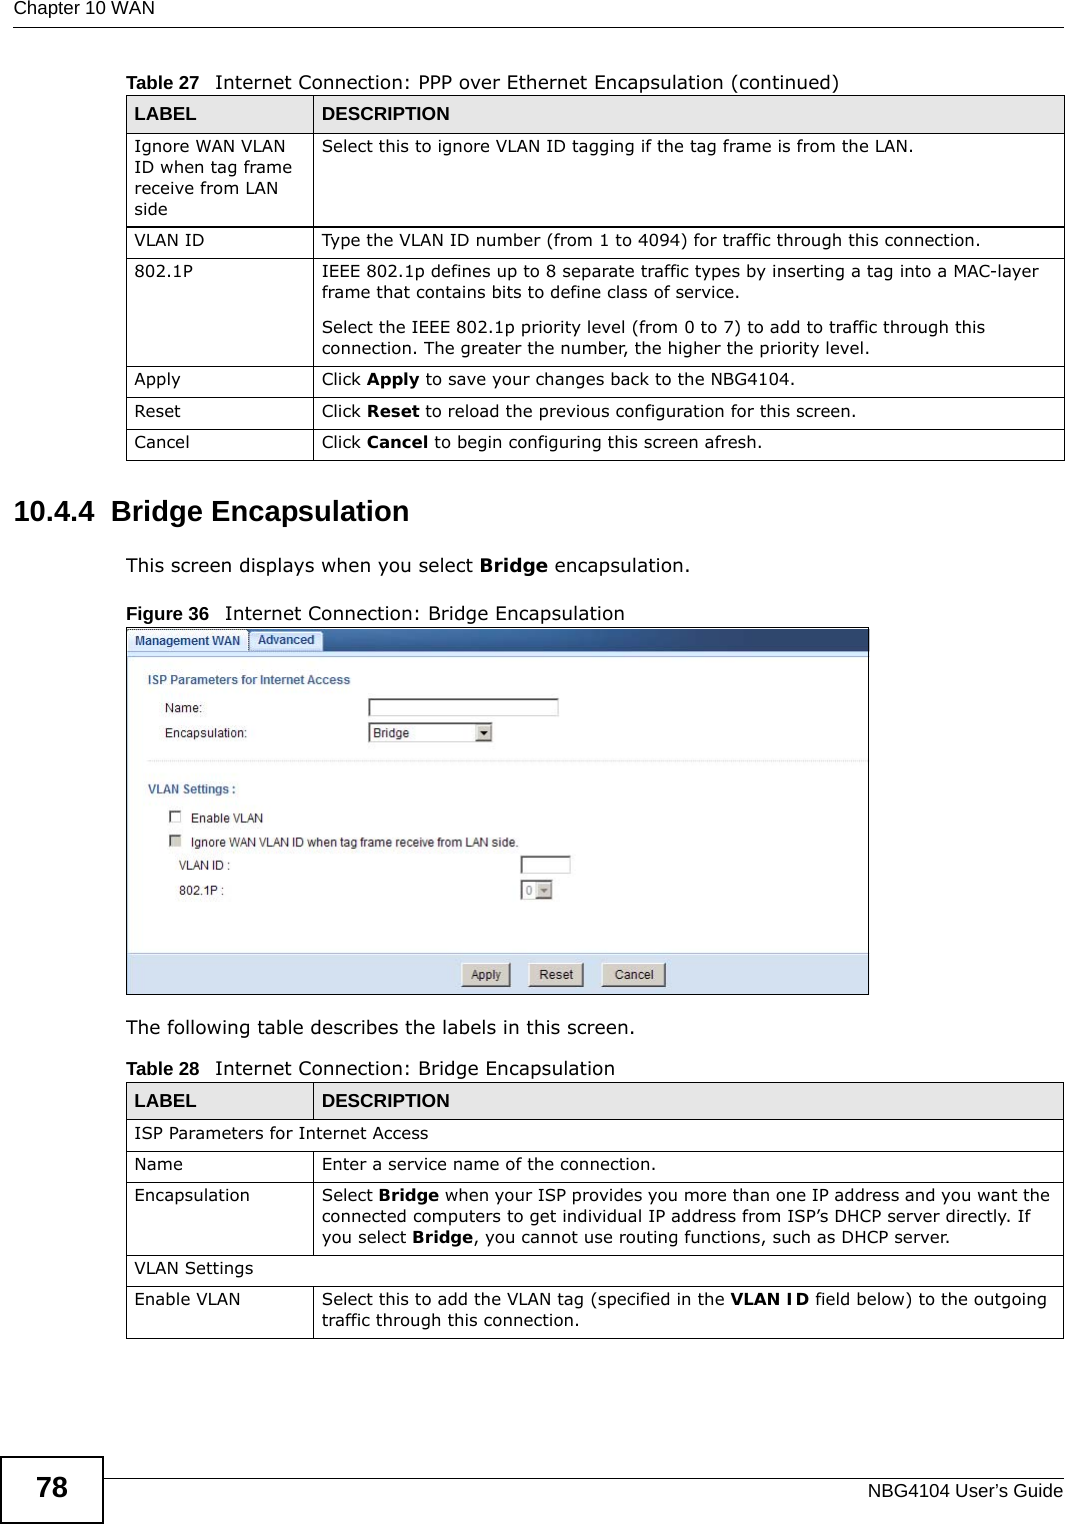 Chapter 10 WANNBG4104 User’s Guide7810.4.4  Bridge EncapsulationThis screen displays when you select Bridge encapsulation.Figure 36   Internet Connection: Bridge EncapsulationThe following table describes the labels in this screen.Ignore WAN VLAN ID when tag frame receive from LAN sideSelect this to ignore VLAN ID tagging if the tag frame is from the LAN.VLAN ID  Type the VLAN ID number (from 1 to 4094) for traffic through this connection.802.1P  IEEE 802.1p defines up to 8 separate traffic types by inserting a tag into a MAC-layer frame that contains bits to define class of service. Select the IEEE 802.1p priority level (from 0 to 7) to add to traffic through this connection. The greater the number, the higher the priority level.Apply Click Apply to save your changes back to the NBG4104.Reset Click Reset to reload the previous configuration for this screen.Cancel Click Cancel to begin configuring this screen afresh.Table 27   Internet Connection: PPP over Ethernet Encapsulation (continued)LABEL DESCRIPTIONTable 28   Internet Connection: Bridge EncapsulationLABEL DESCRIPTIONISP Parameters for Internet AccessName Enter a service name of the connection.Encapsulation Select Bridge when your ISP provides you more than one IP address and you want the connected computers to get individual IP address from ISP’s DHCP server directly. If you select Bridge, you cannot use routing functions, such as DHCP server.VLAN SettingsEnable VLAN  Select this to add the VLAN tag (specified in the VLAN ID field below) to the outgoing traffic through this connection.